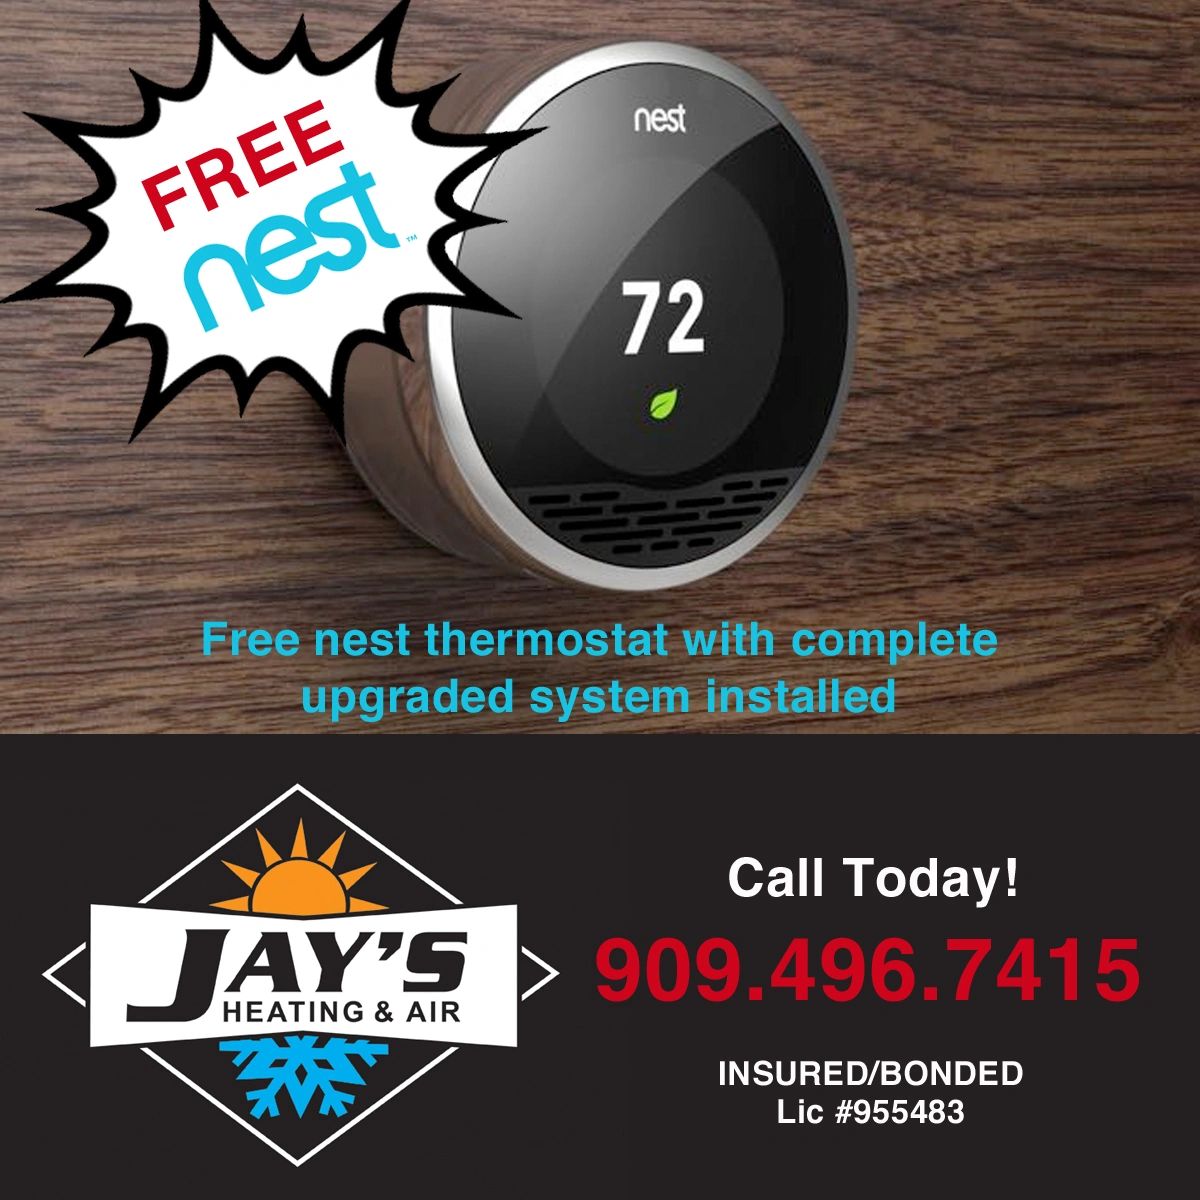 jays heating and air conditioning